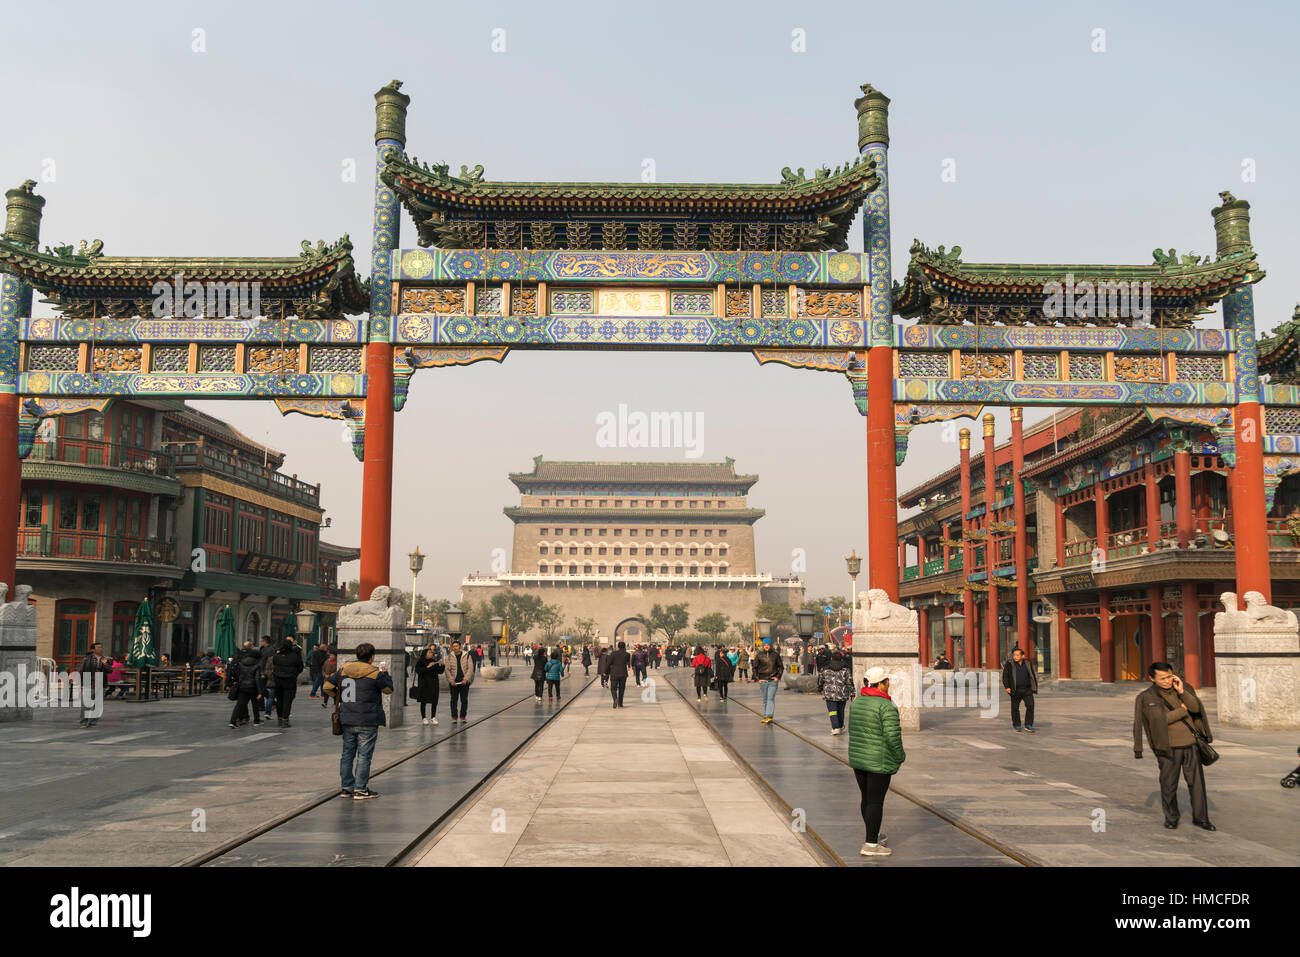 entrance to Qianmen Street with a traditional archway and Qianmen Gate , Beijing, People's Republic of China, Asia Stock Photo